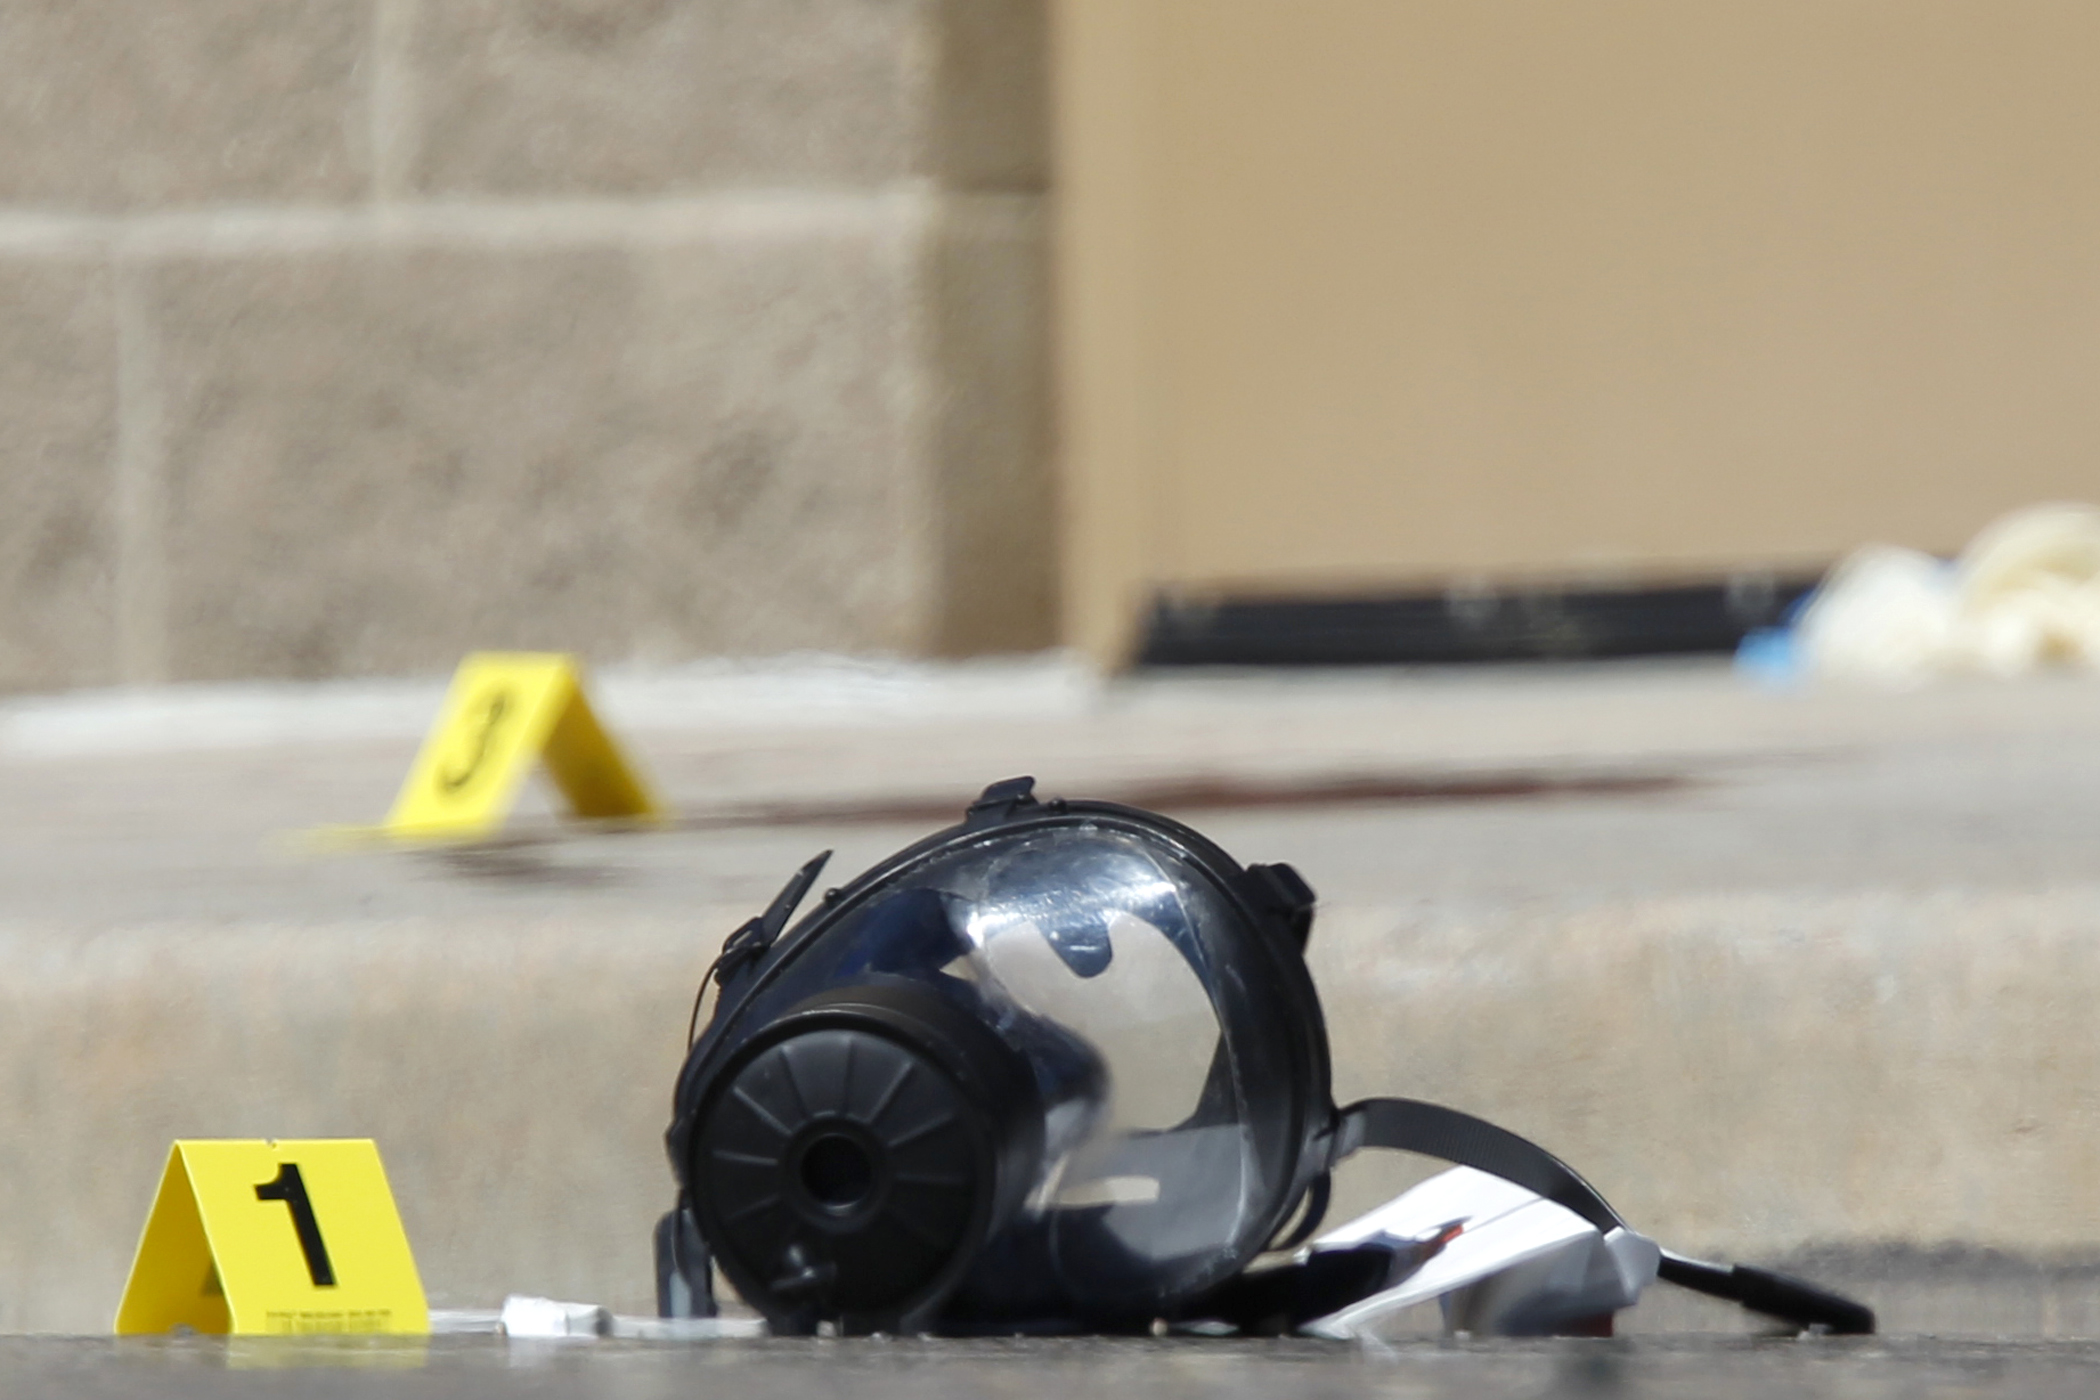 Yellow markers sit next to evidence, including a gas mask, as police investigate the scene outside the Century 16 movie theater in Aurora, Colo., July 20, 2012.